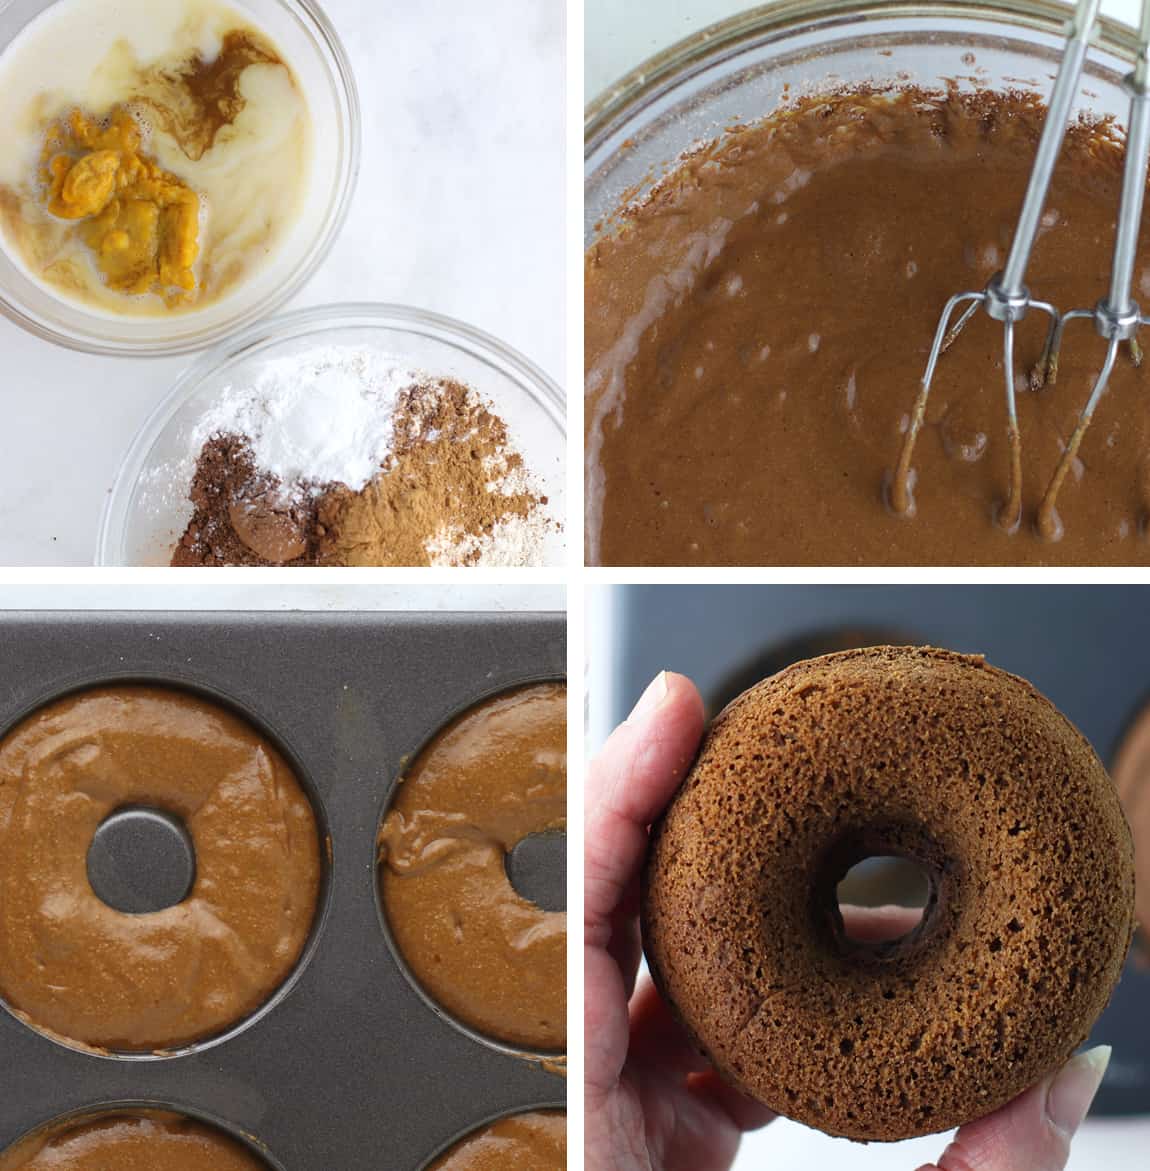 Steps to make Chocolate Frosted Donuts